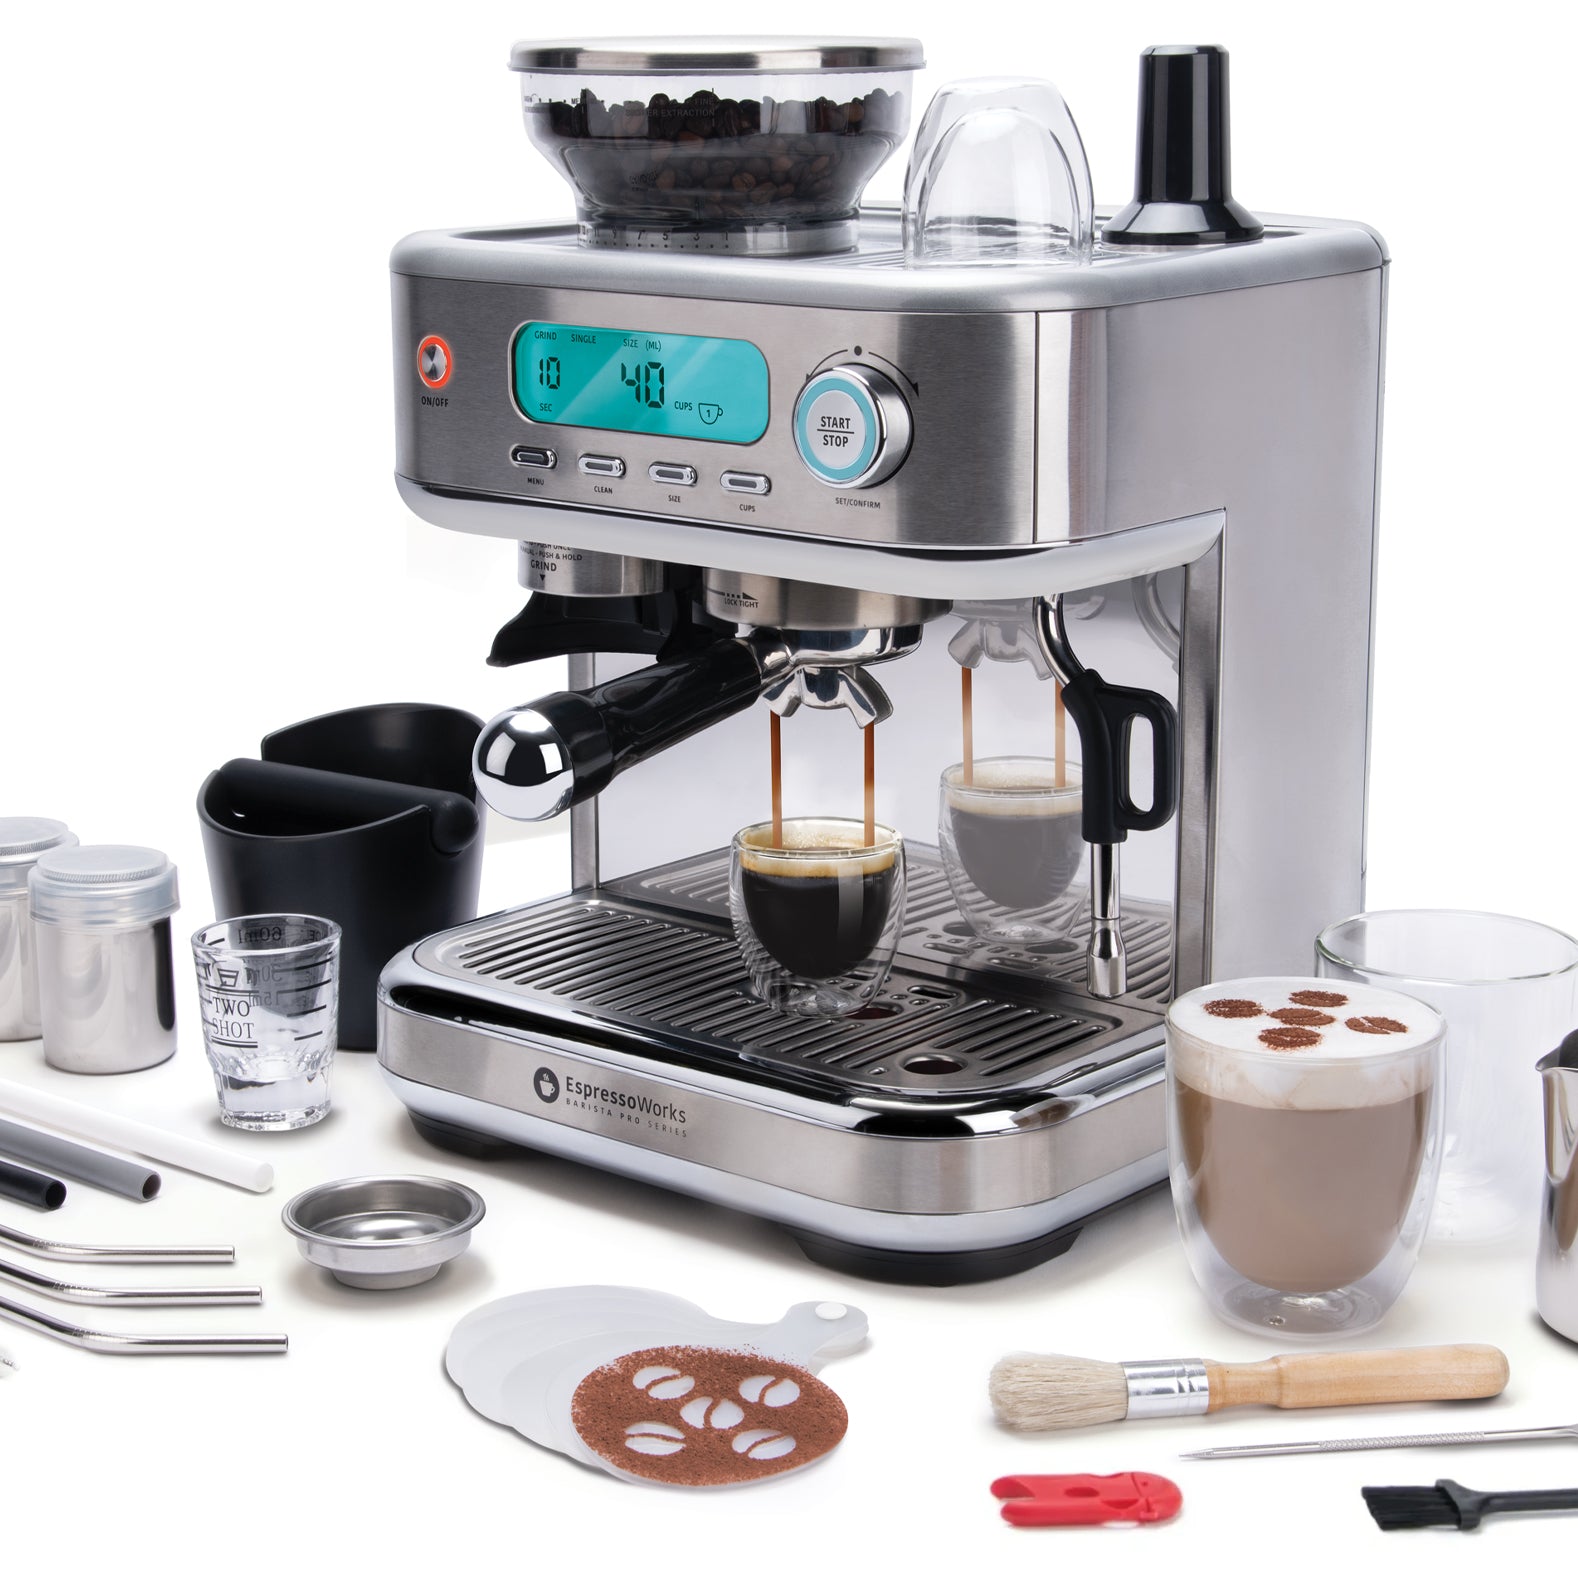 Digital Display and Built-In Coffee Bean Grinder of the EspressoWorks 30-Piece Barista Pro Espresso and Cappuccino Coffee Machine